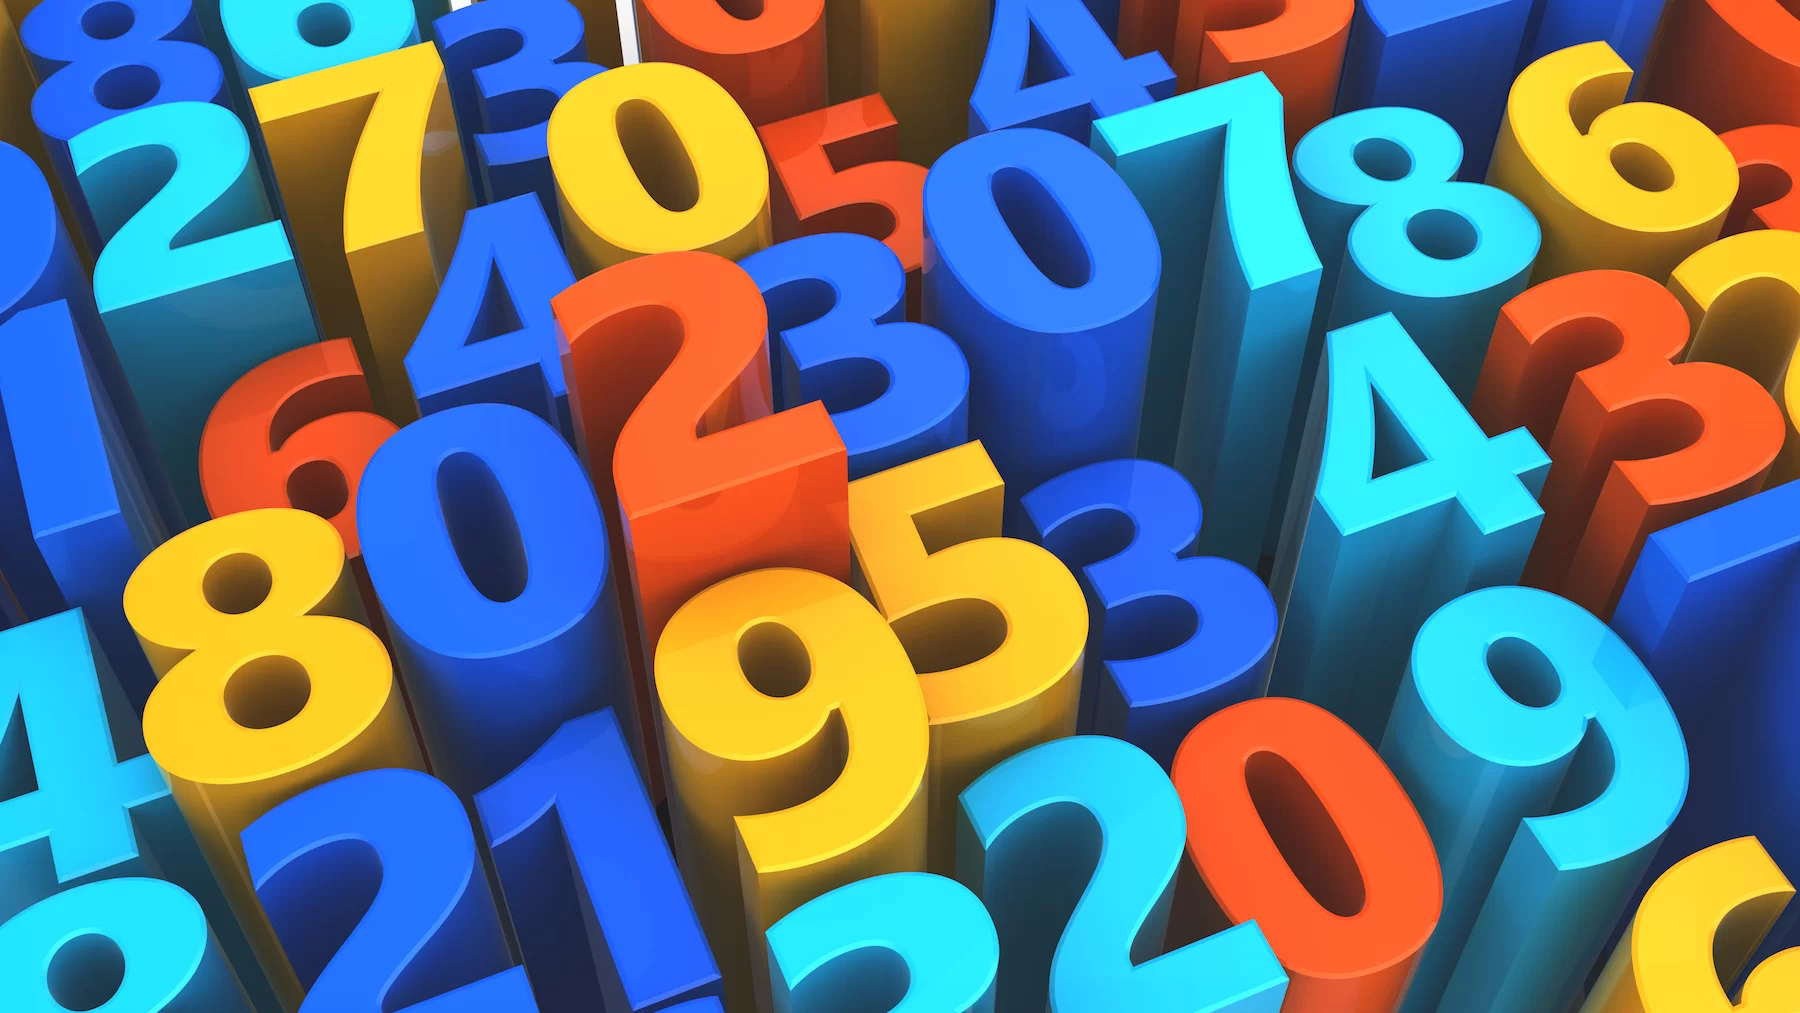 How Many Times a Number is Multiplied by Itself